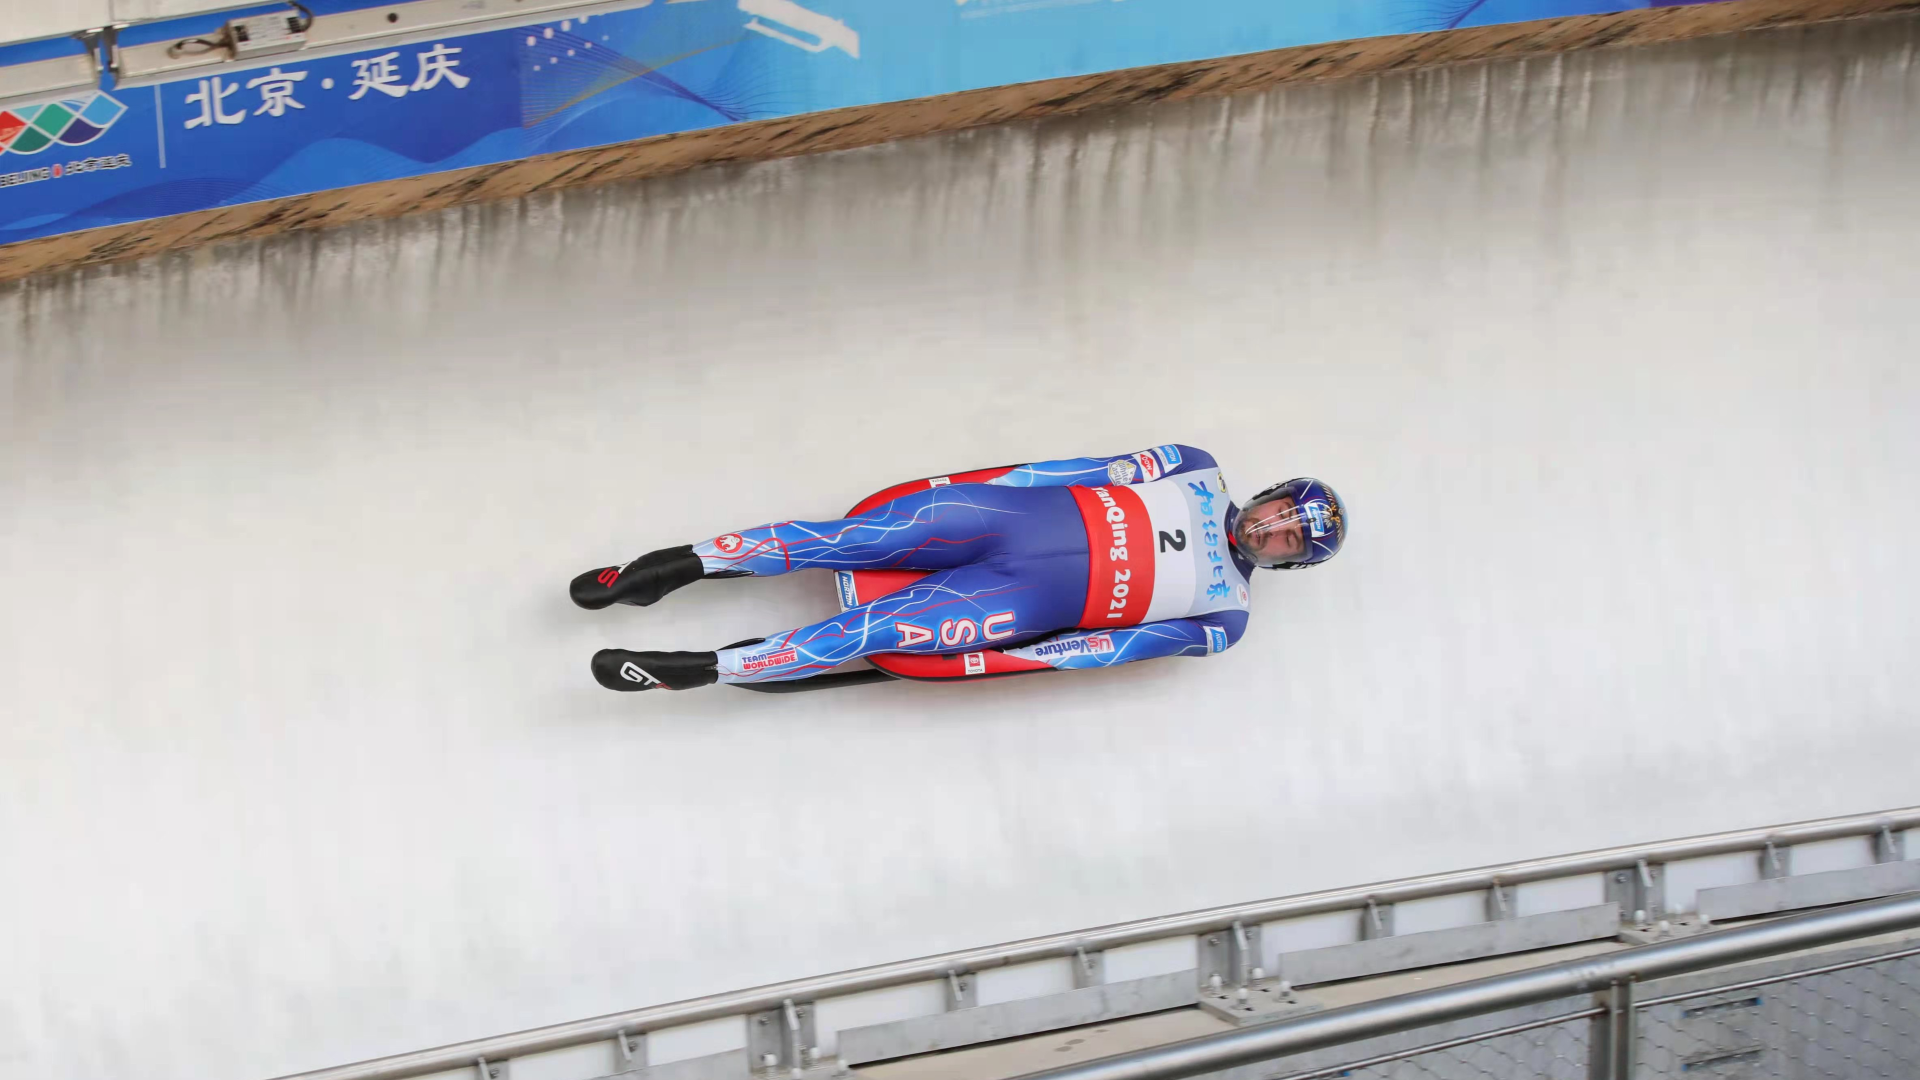 Luge World Cup opens on new track for Beijing 2022 Winter Olympics CGTN